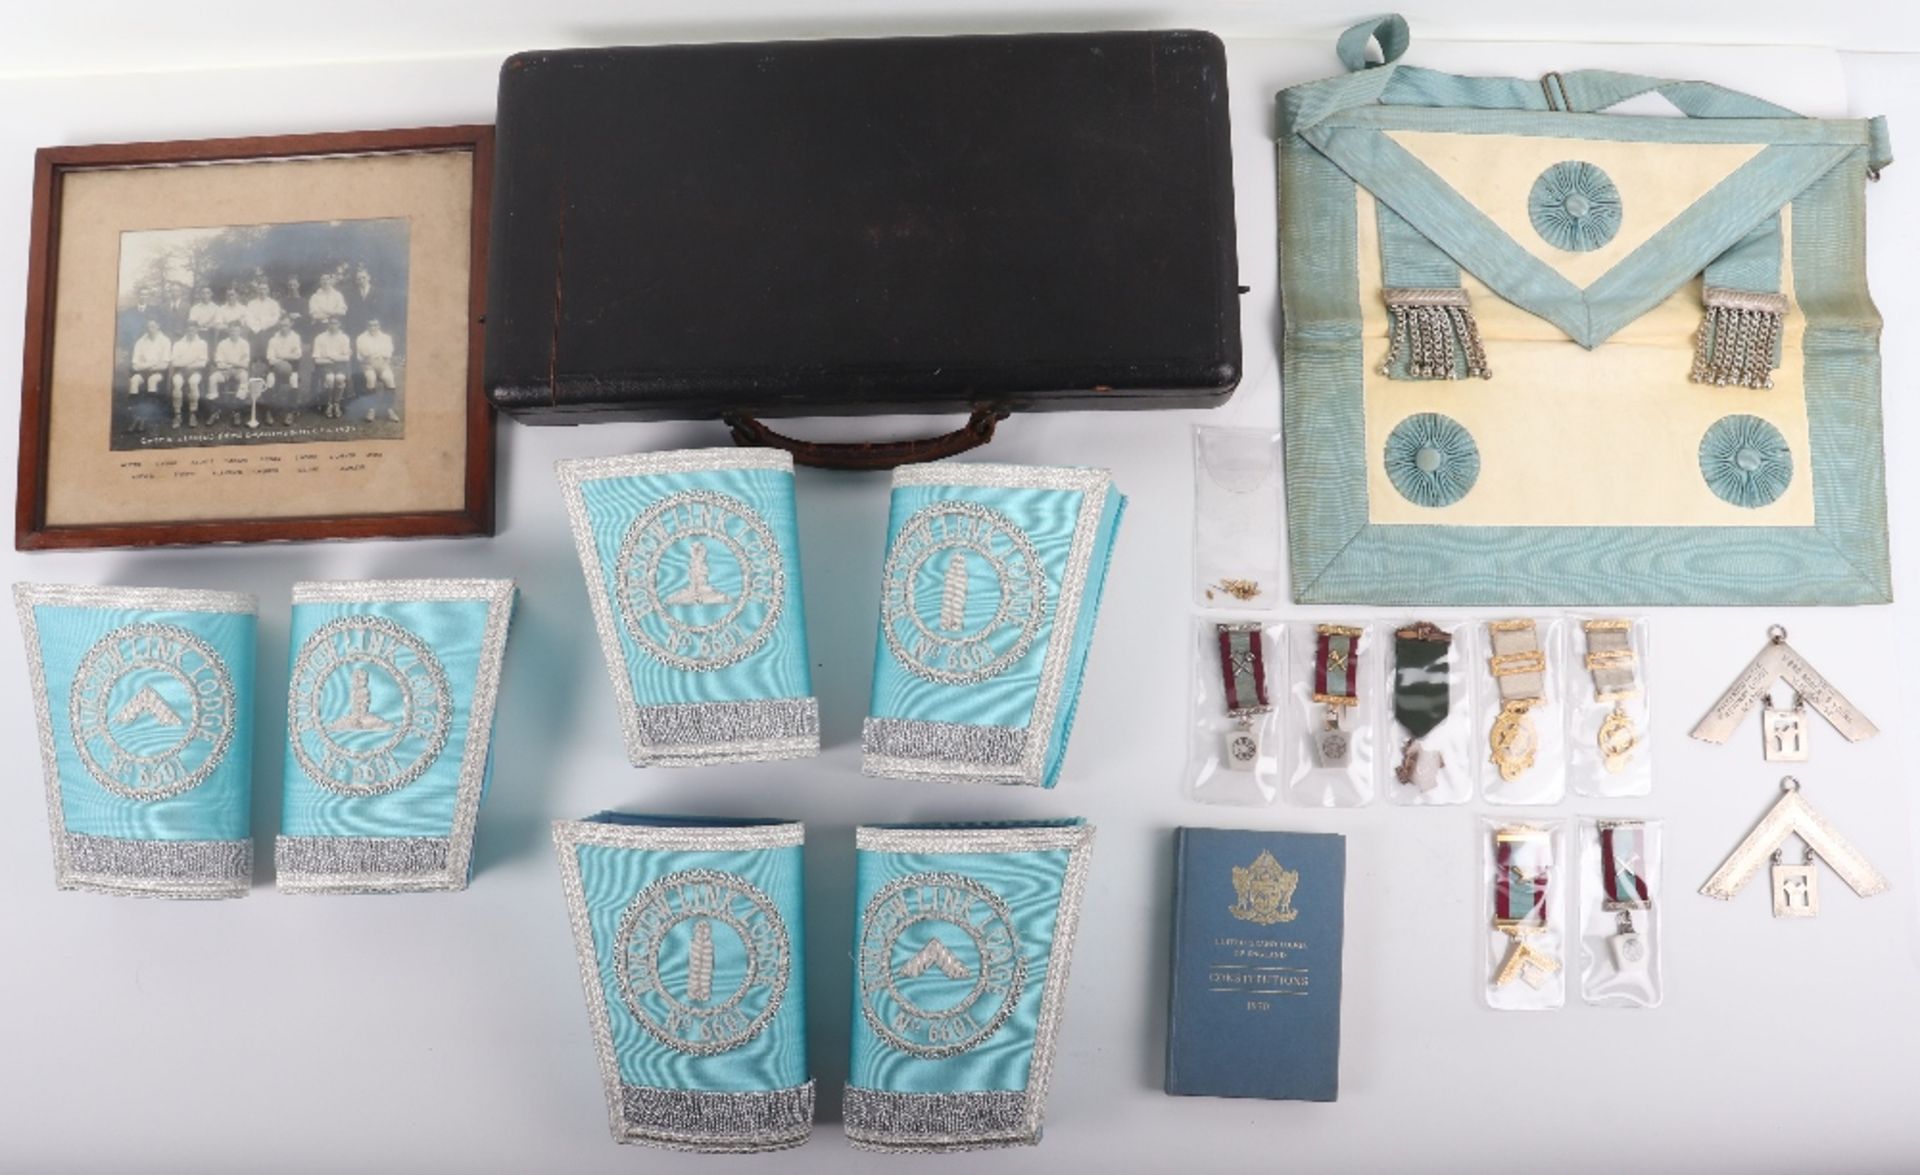 Masonic items from the 1950’ and later